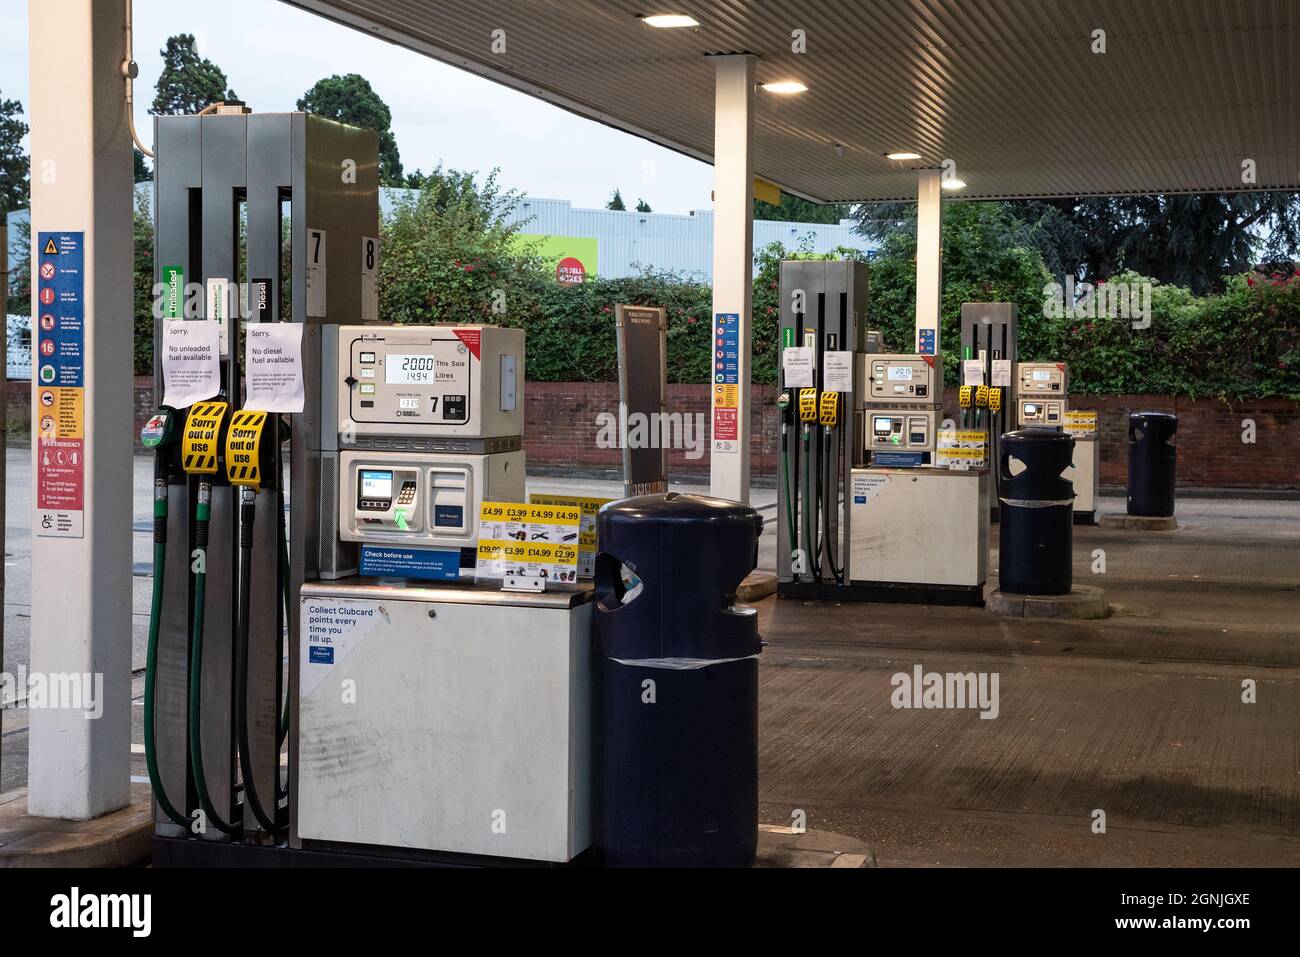 Aylesbury, UK. 25th September 2021. No fuel. Earlier panic buying fuel at Aylesbury Tring Road Tesco Store filling station caused large queues. Now late afternoon all fuel is exhausted and the filling station is closed. Pumps show Sorry Out of Use on all pumps. Credit: Stephen Bell/Alamy Stock Photo